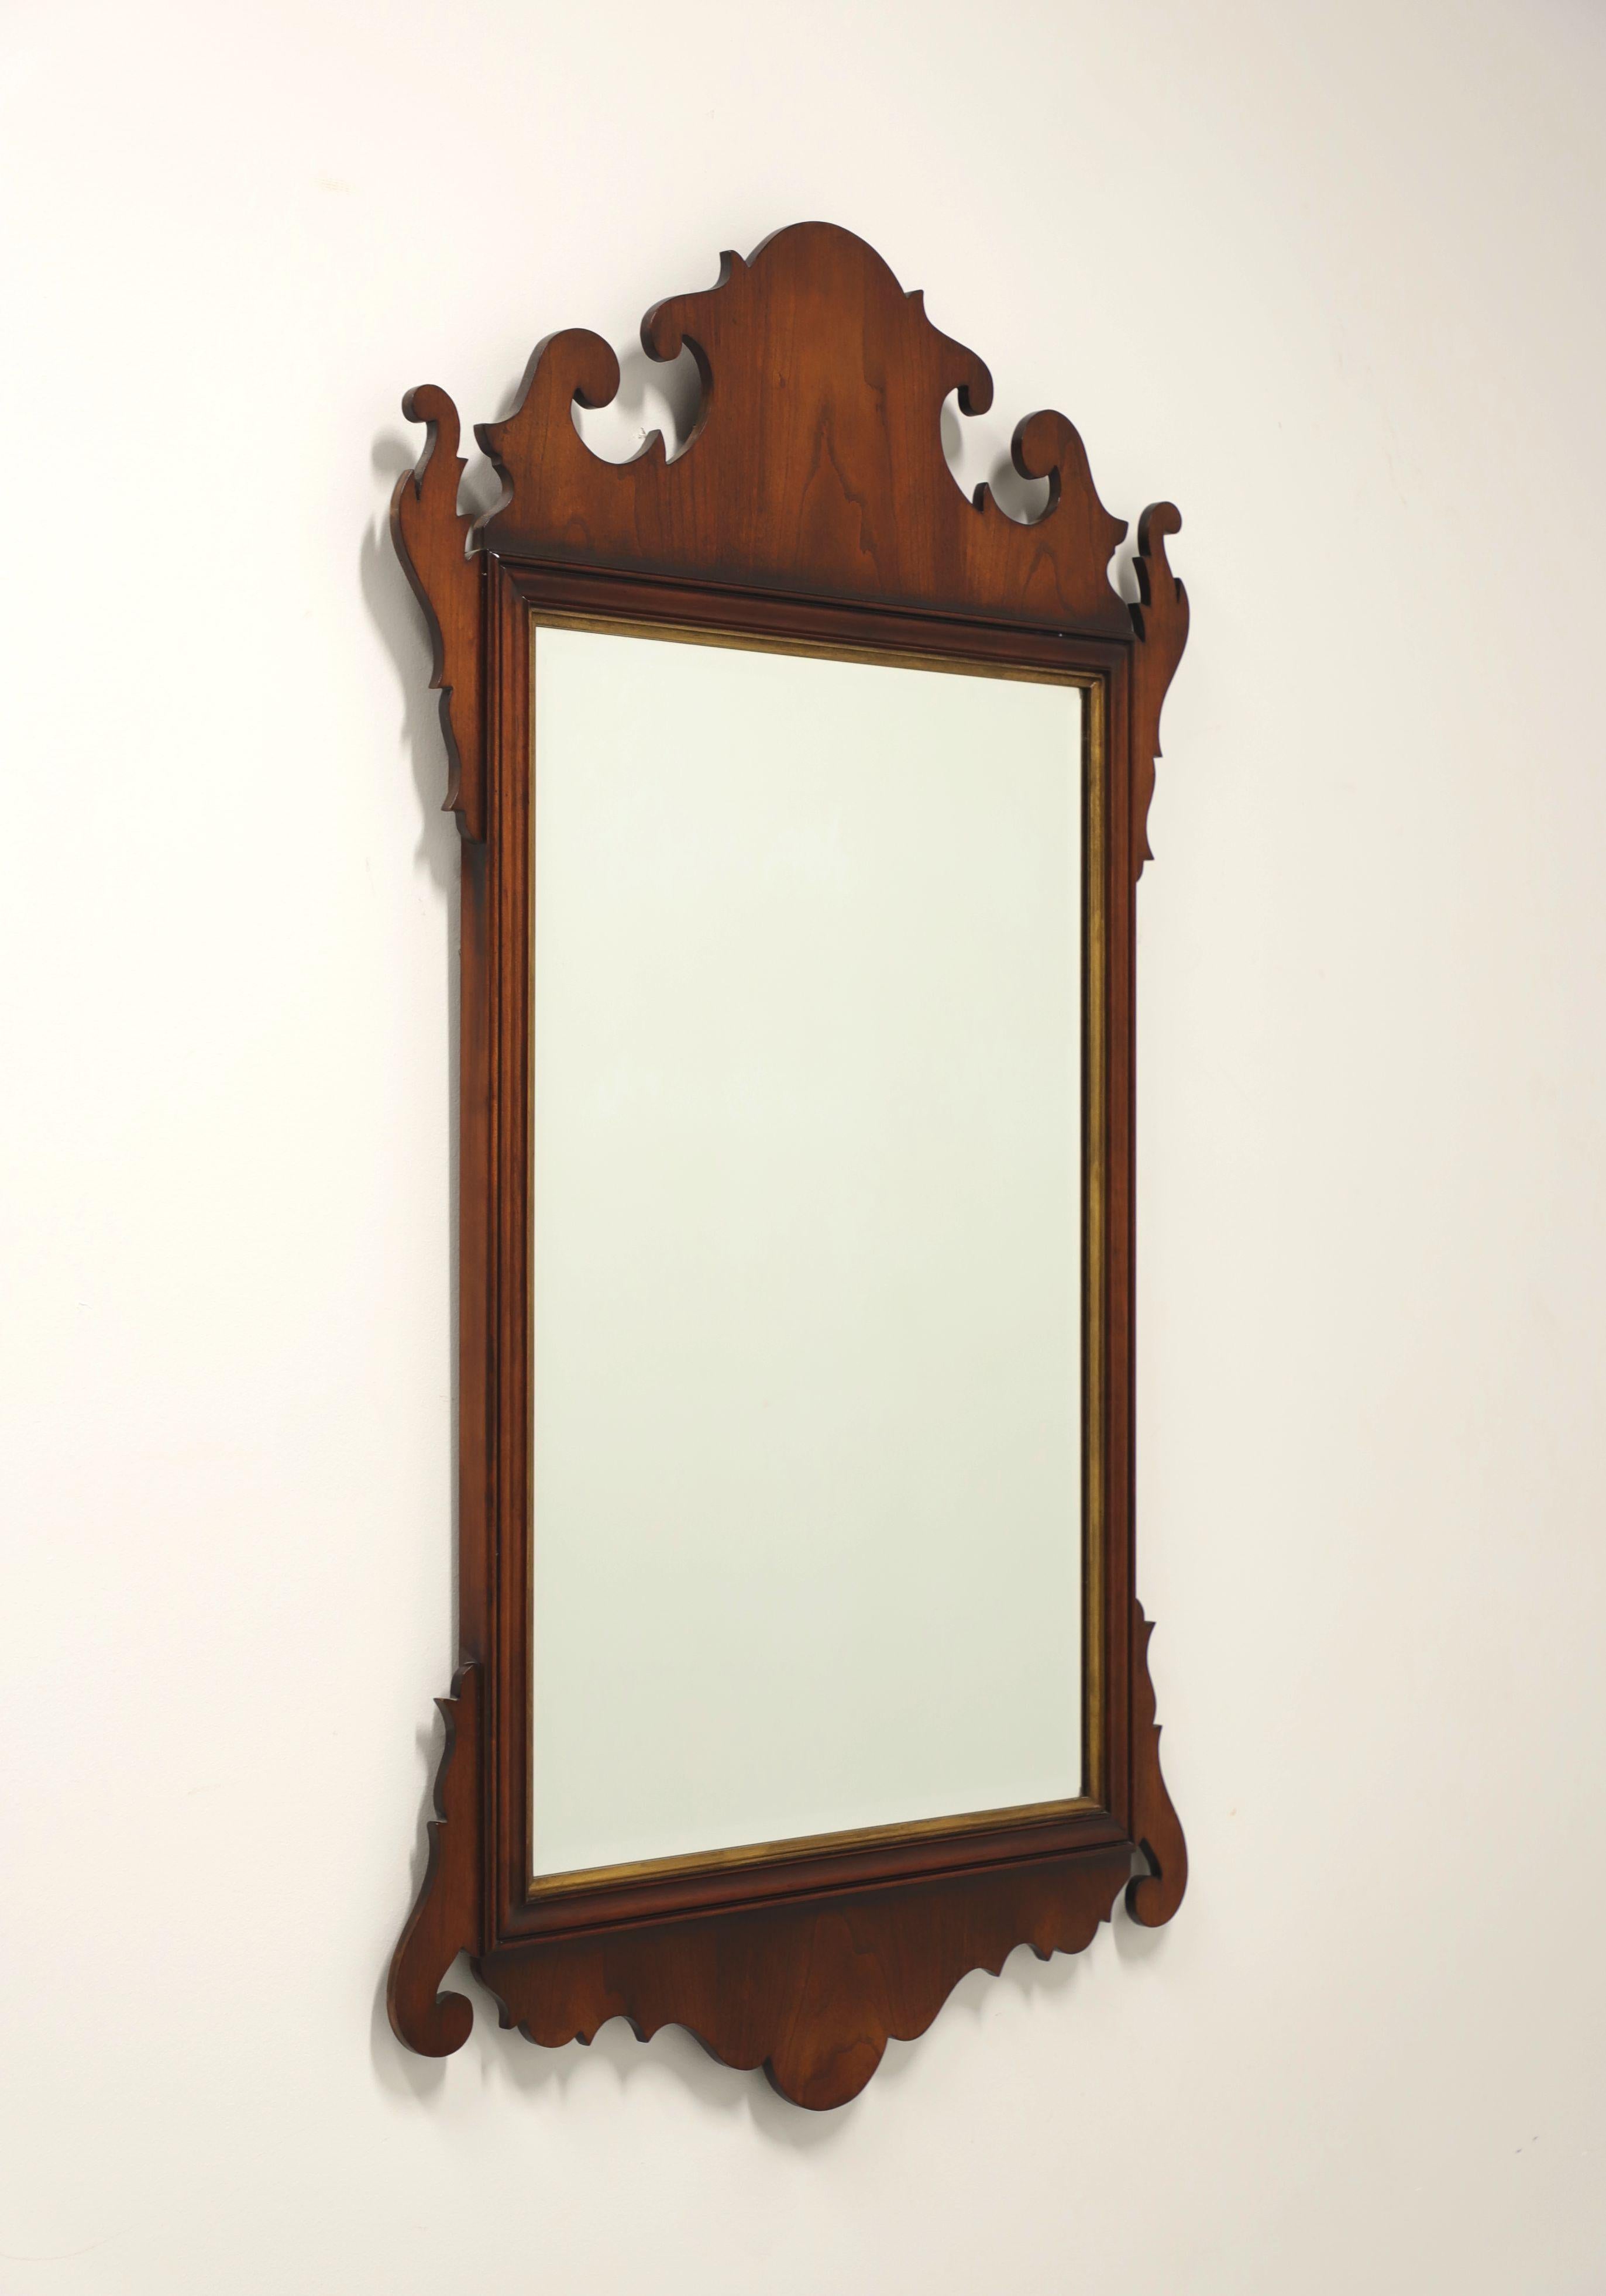 STATTON Centennial Cherry Chippendale Style Wall Mirror 4